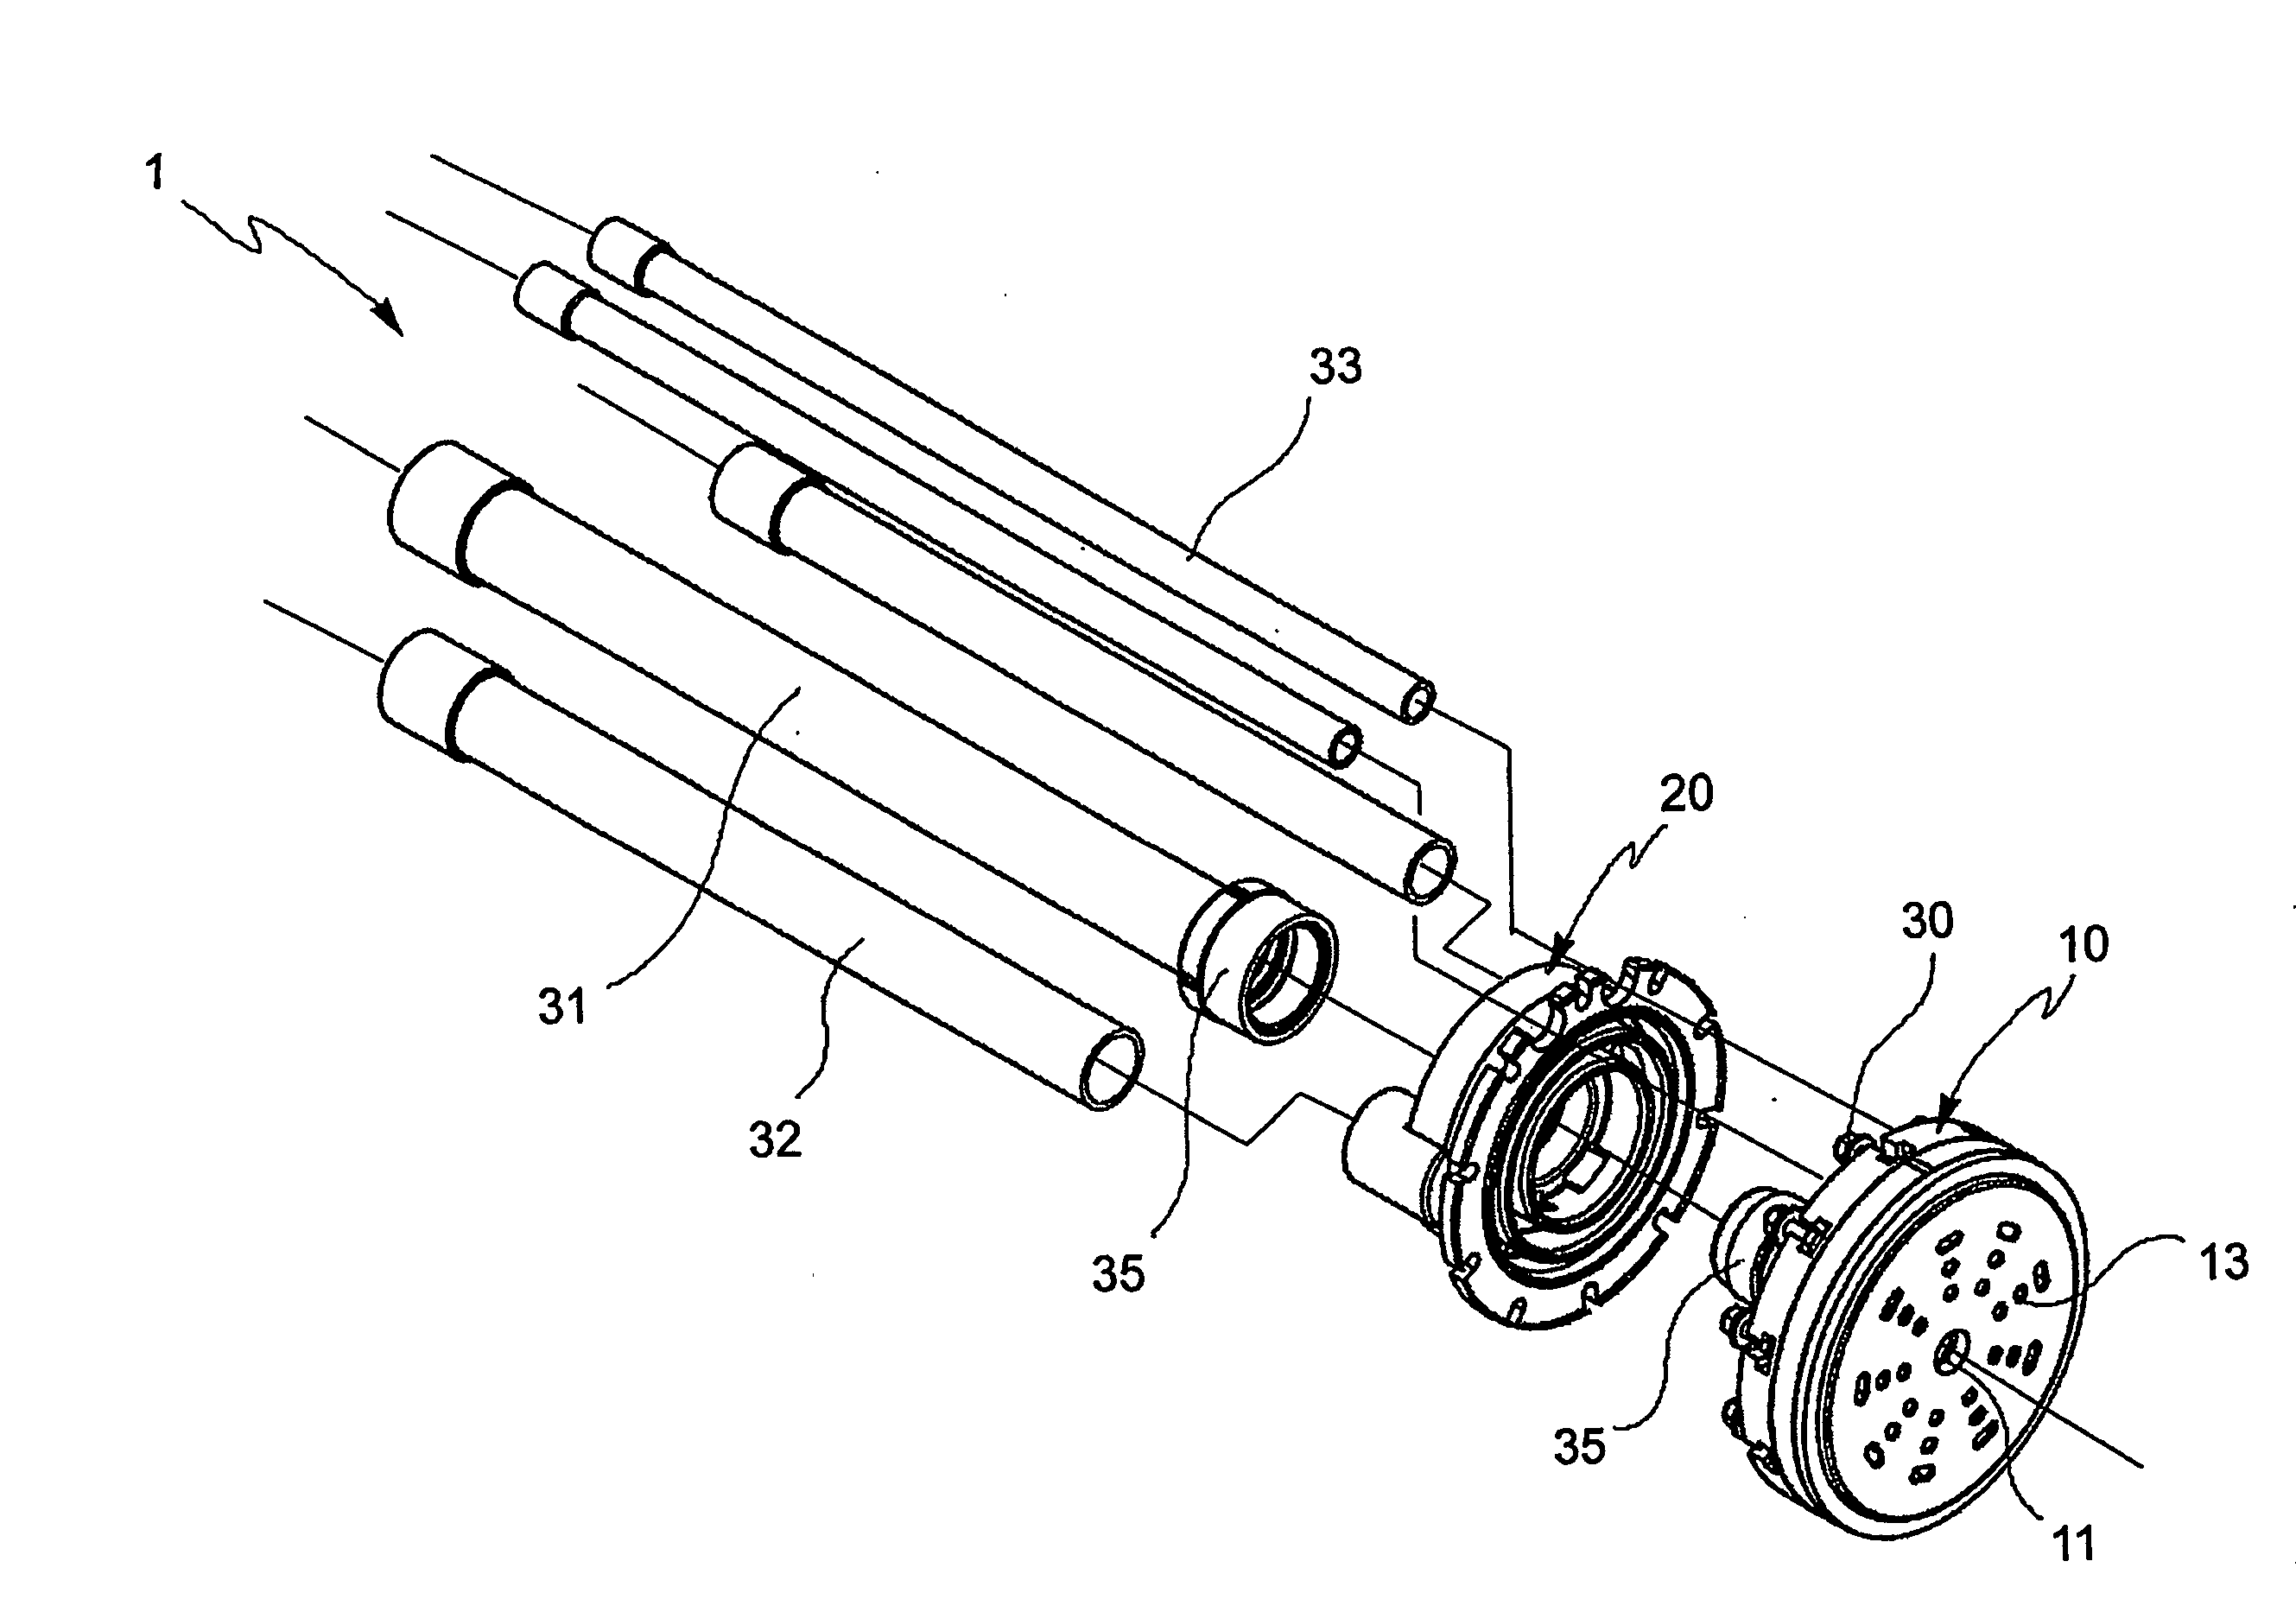 Injector for Arc Furnace